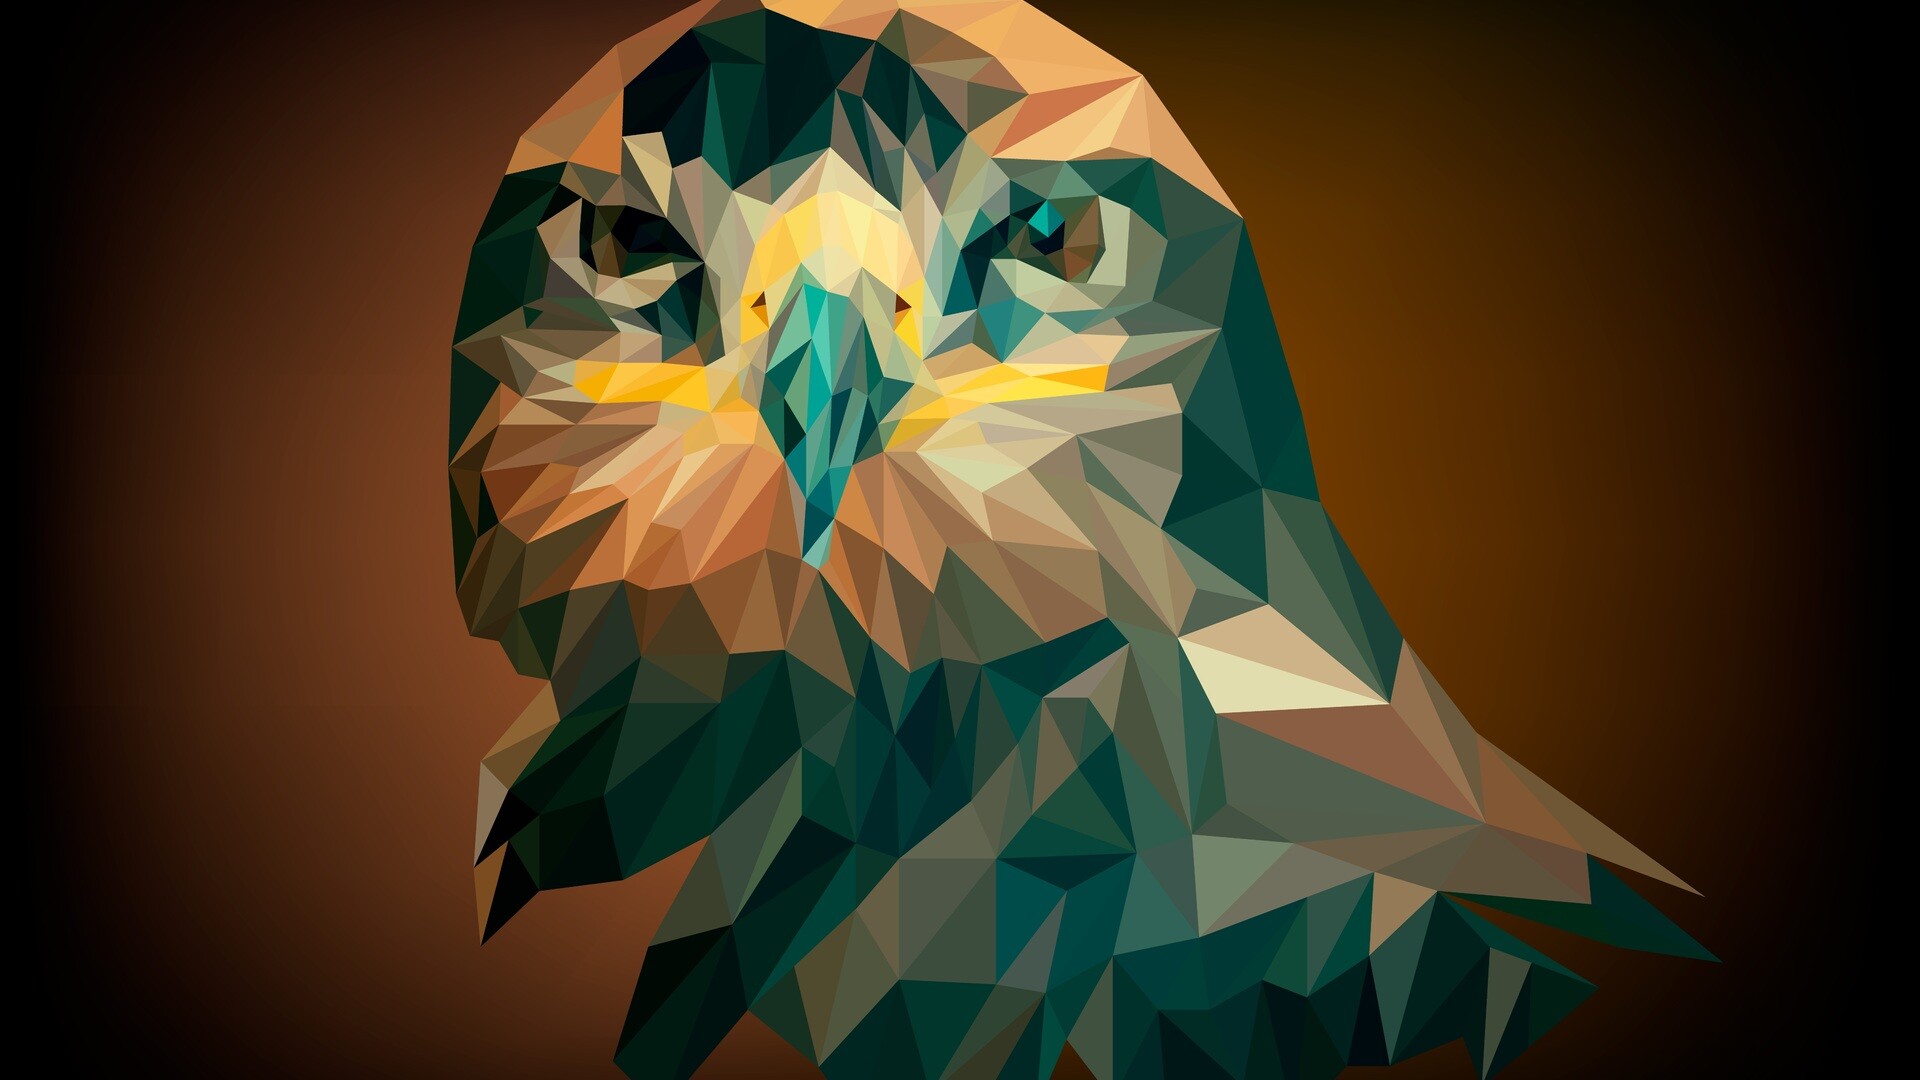 Artistic Owl, Abstract design, Full HD wallpapers, Creative images, 1920x1080 Full HD Desktop